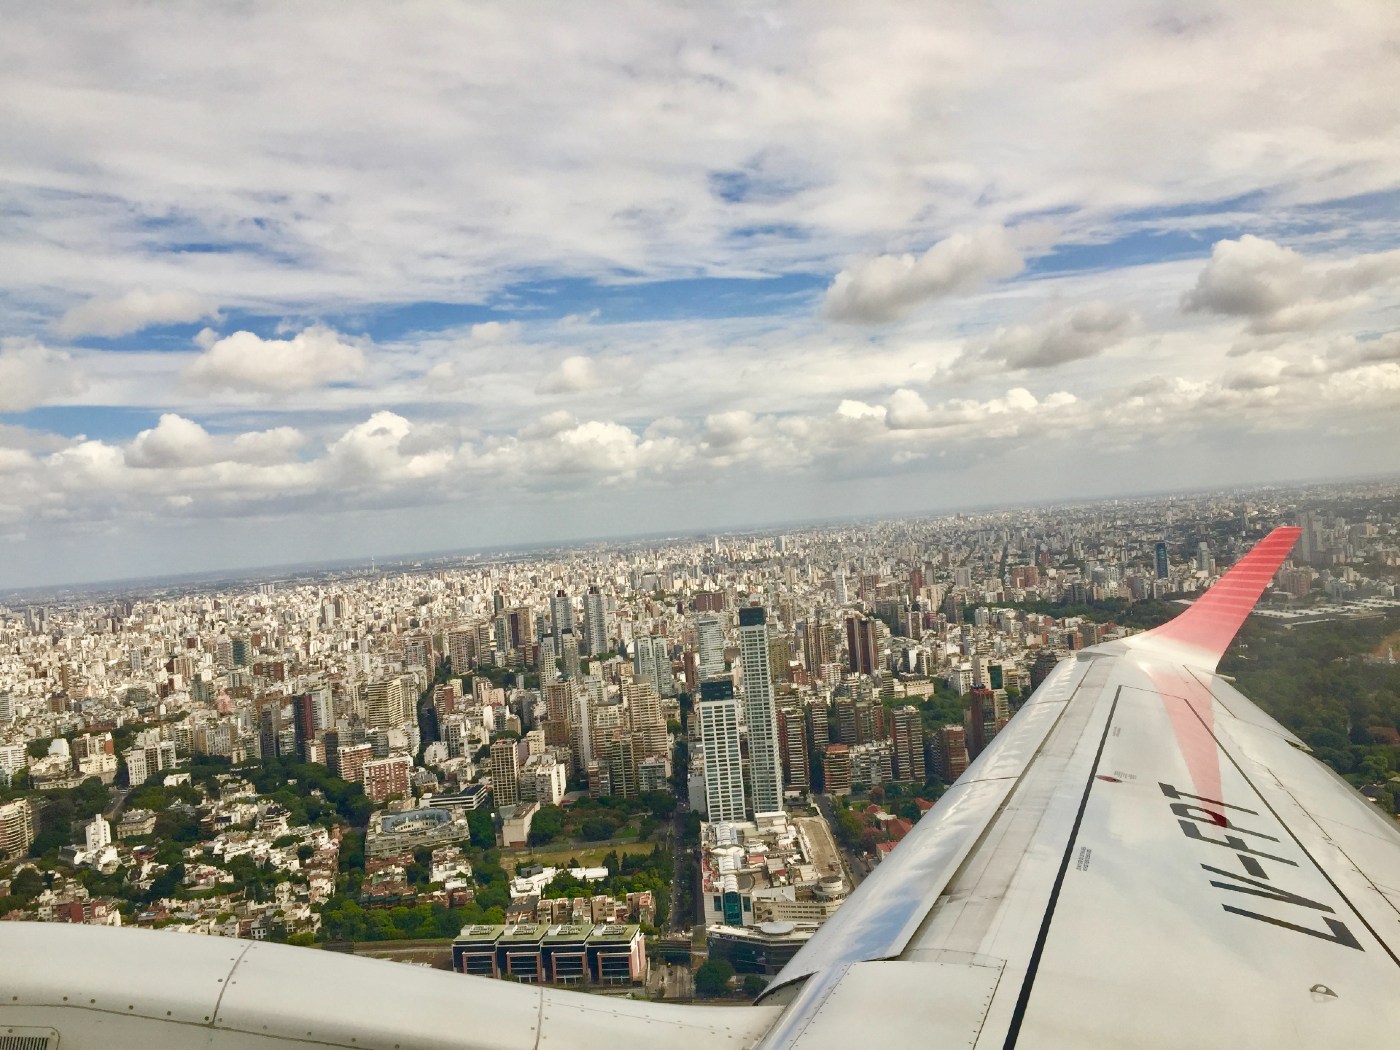 Buenos Aires overview